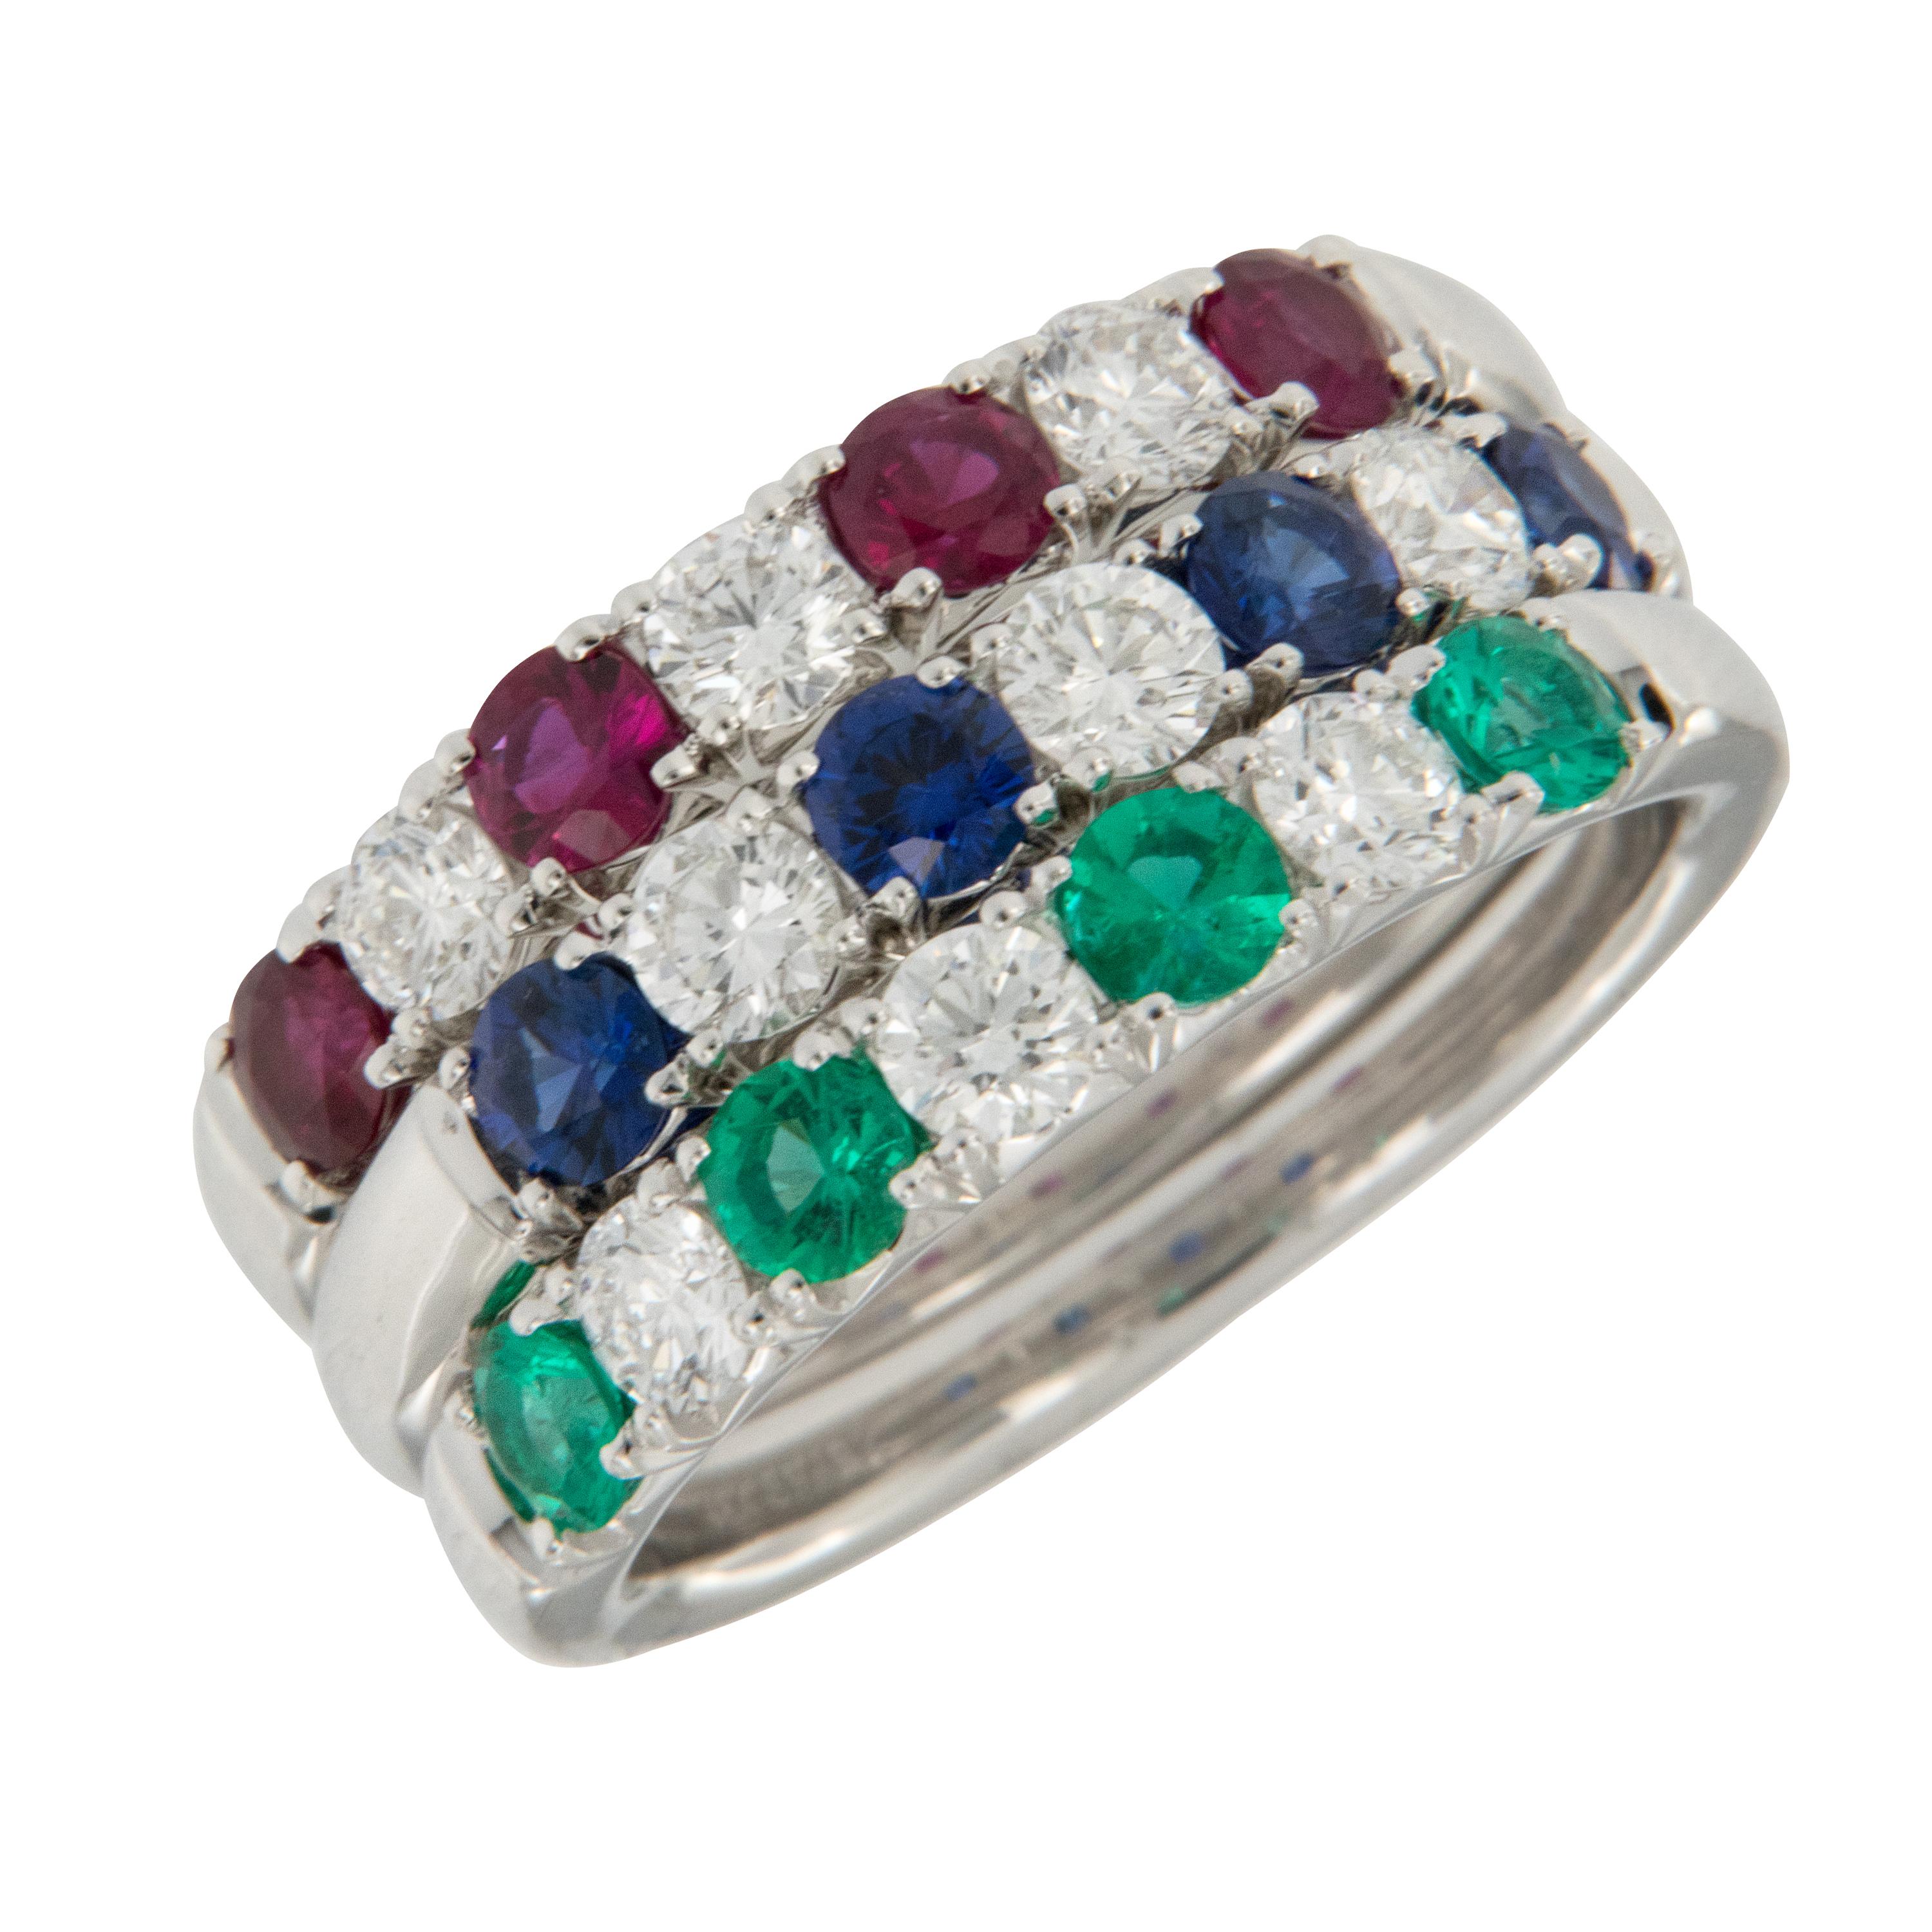 Women's or Men's 18 Karat White Gold Emerald & Diamond Stackable Band Ring by Spark Creations